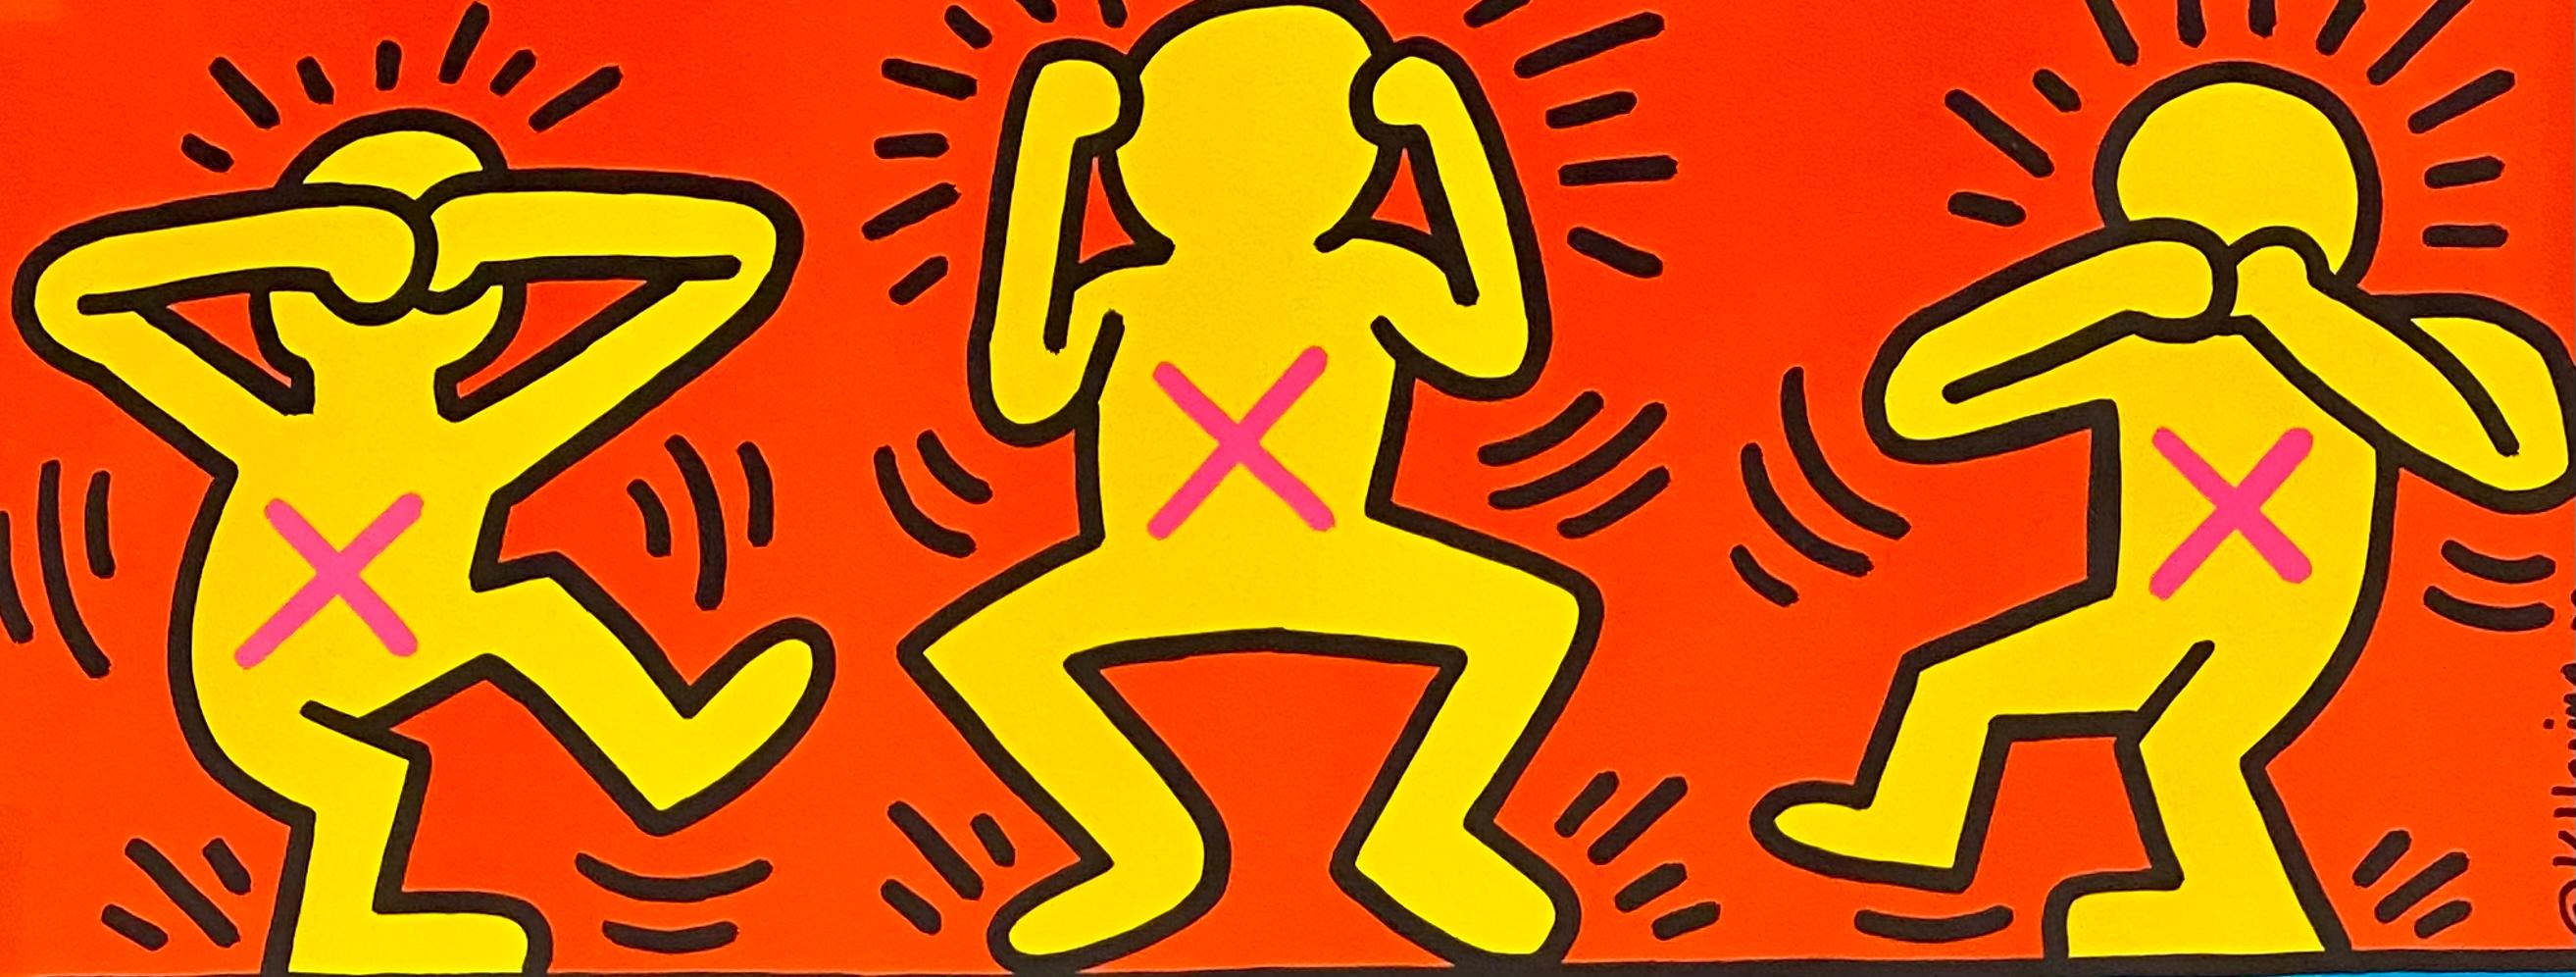 Keith Haring Ignorance = Fear, 1989 (Keith Haring Act Up poster) 3